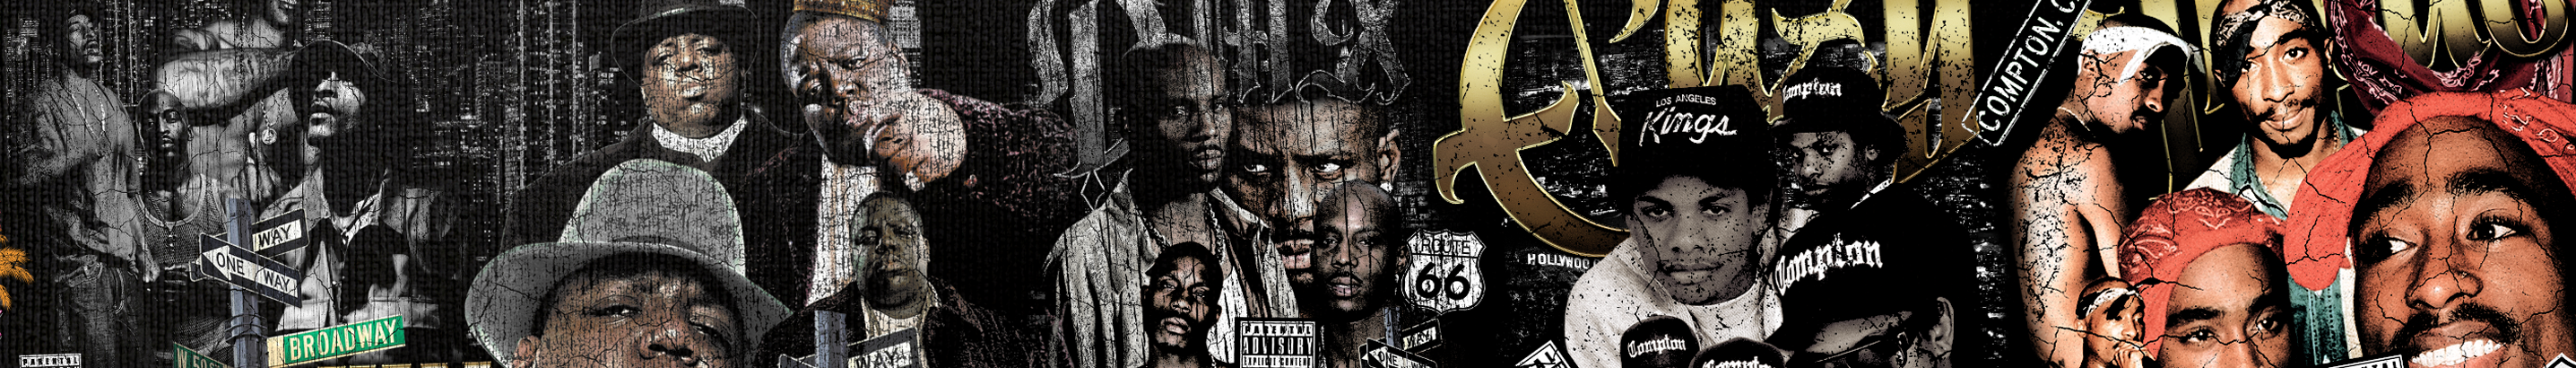 Clipse png's profile banner